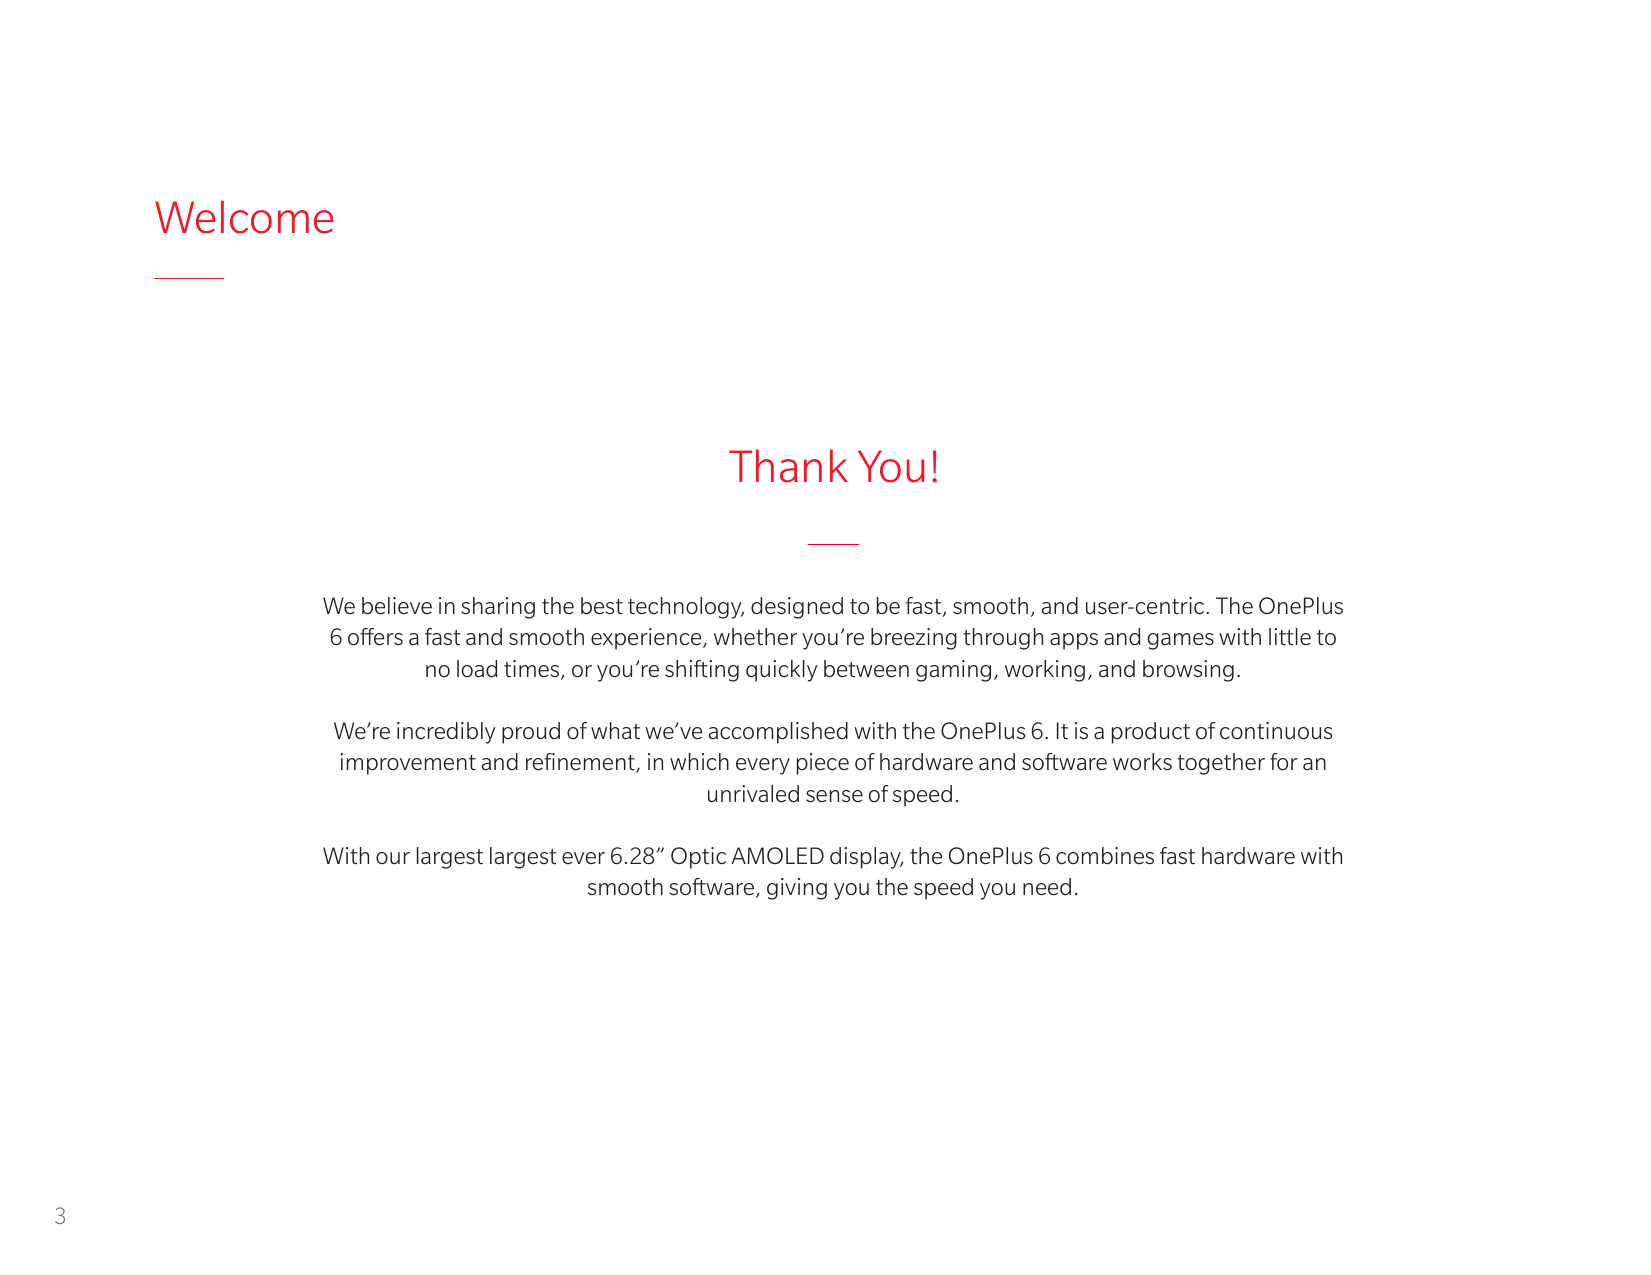 WelcomeThank You!We believe in sharing the best technology, designed to be fast, smooth, and user-centric. The OnePlus6 offers a